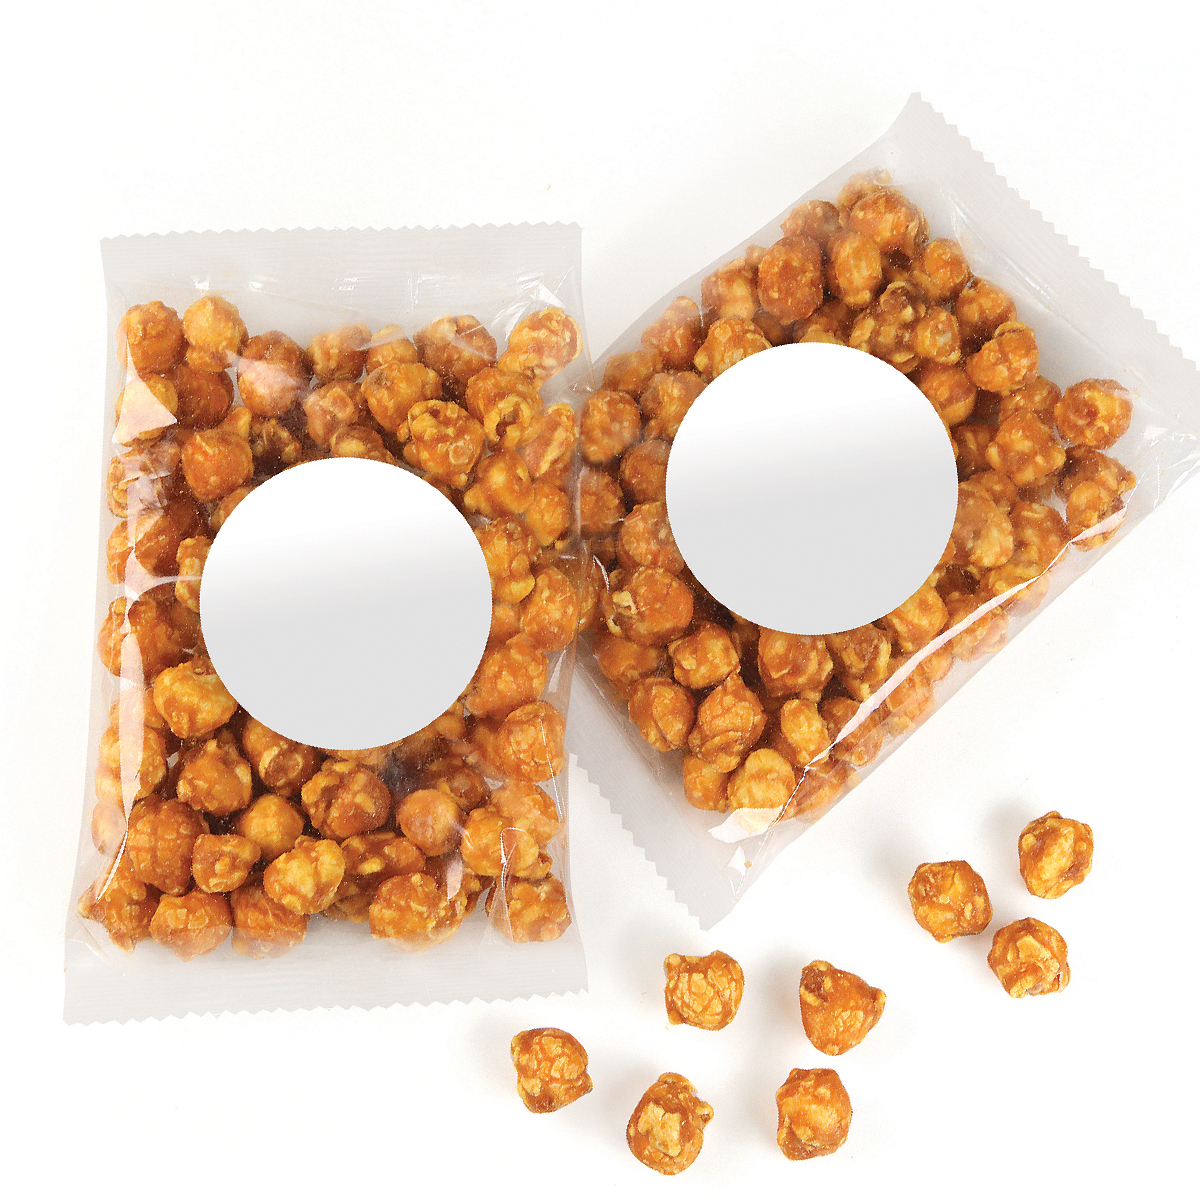 Clear Bag Caramel Cheesecorn Overload